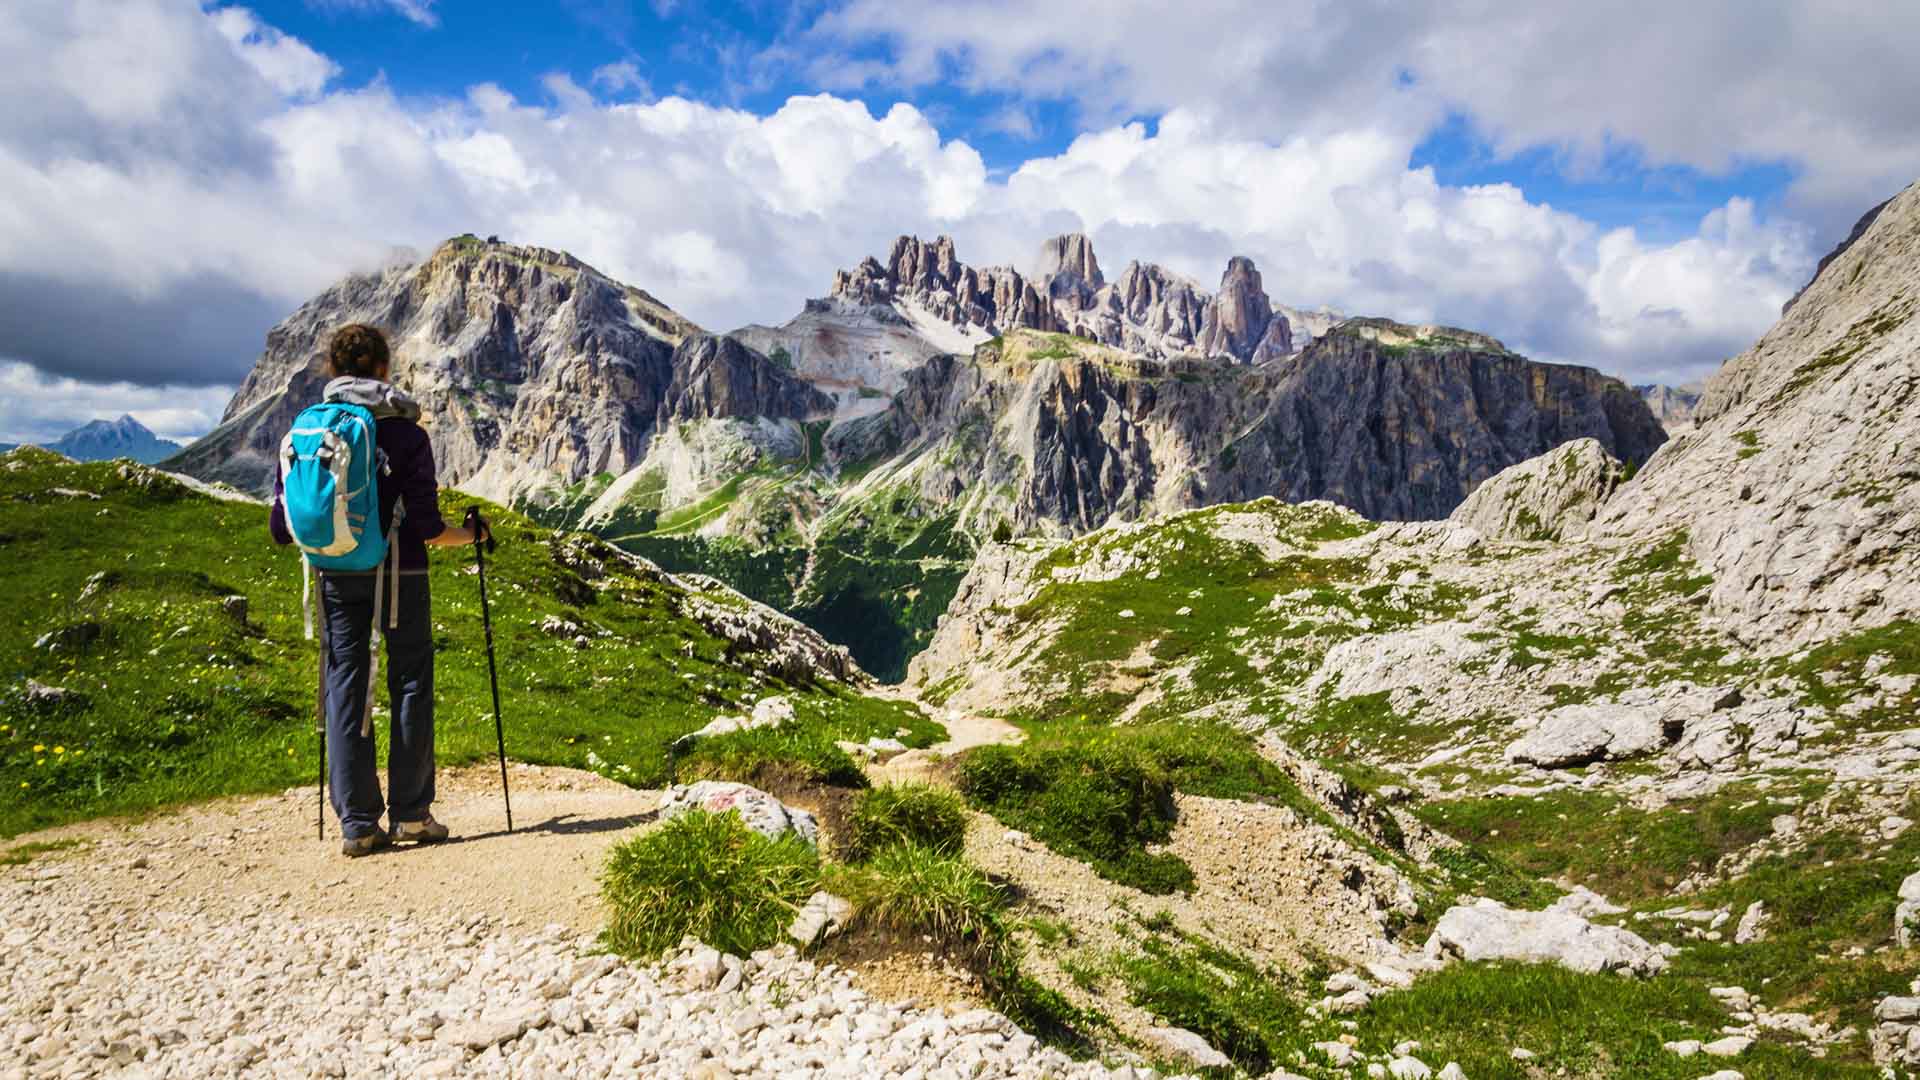 A lone hiker holding a set of poles stands in the middle of a trail taking in a view of the dramatic peaks of the Dolomites in the distance.